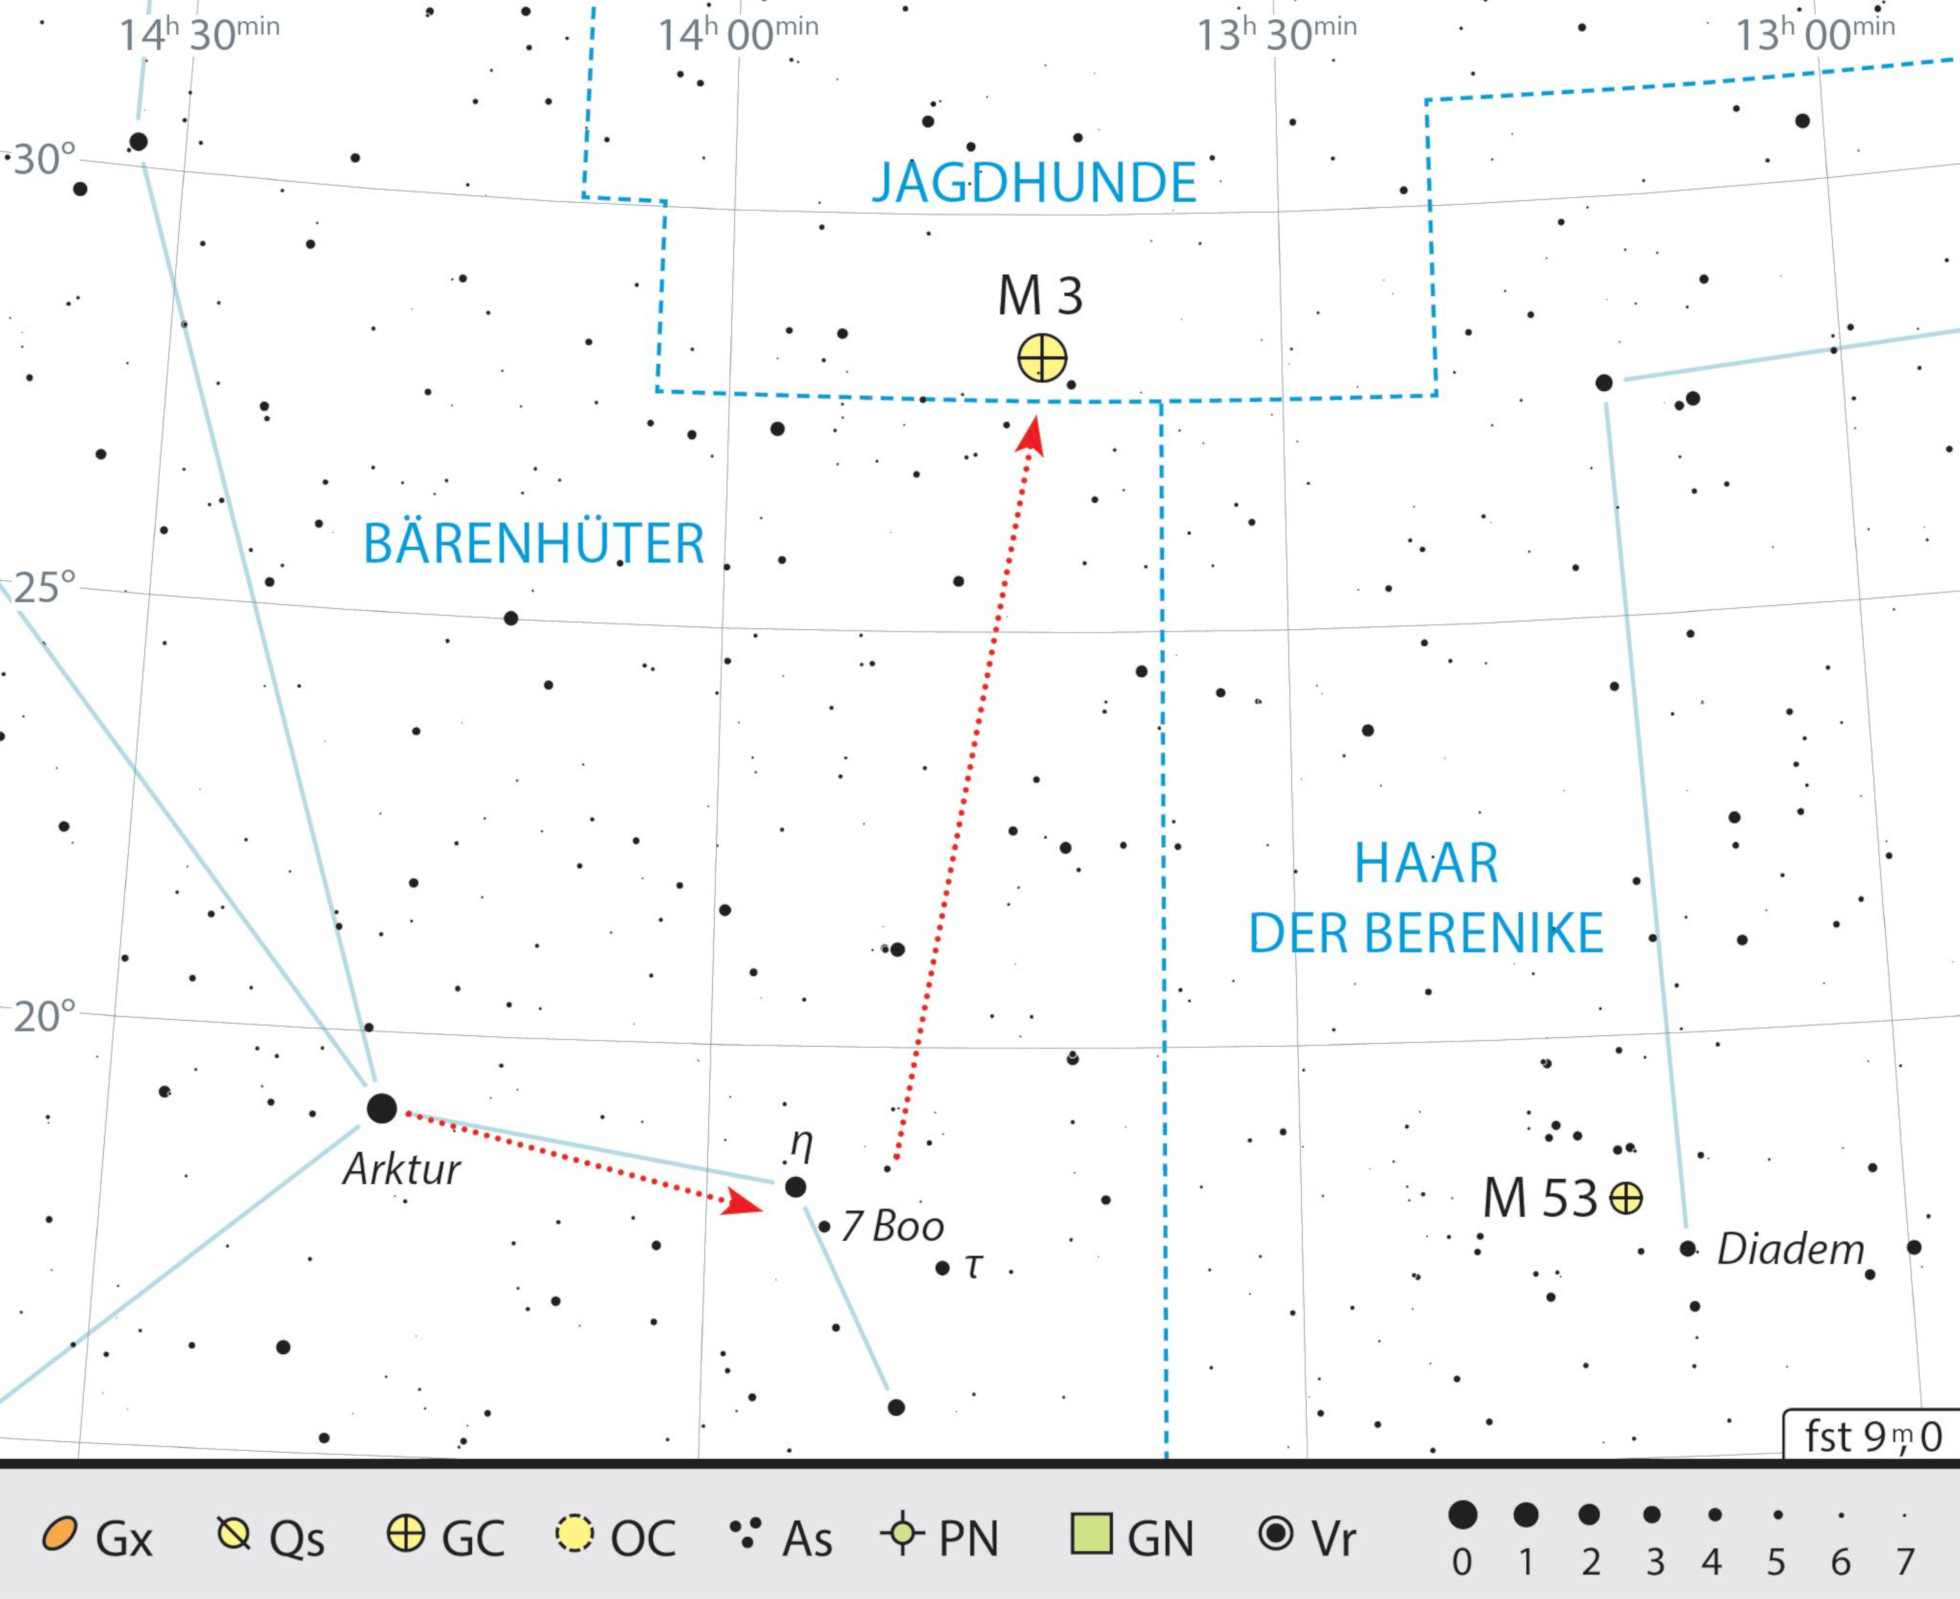 Location map for M3 in the constellation of Canes Venatici . J. Scholte